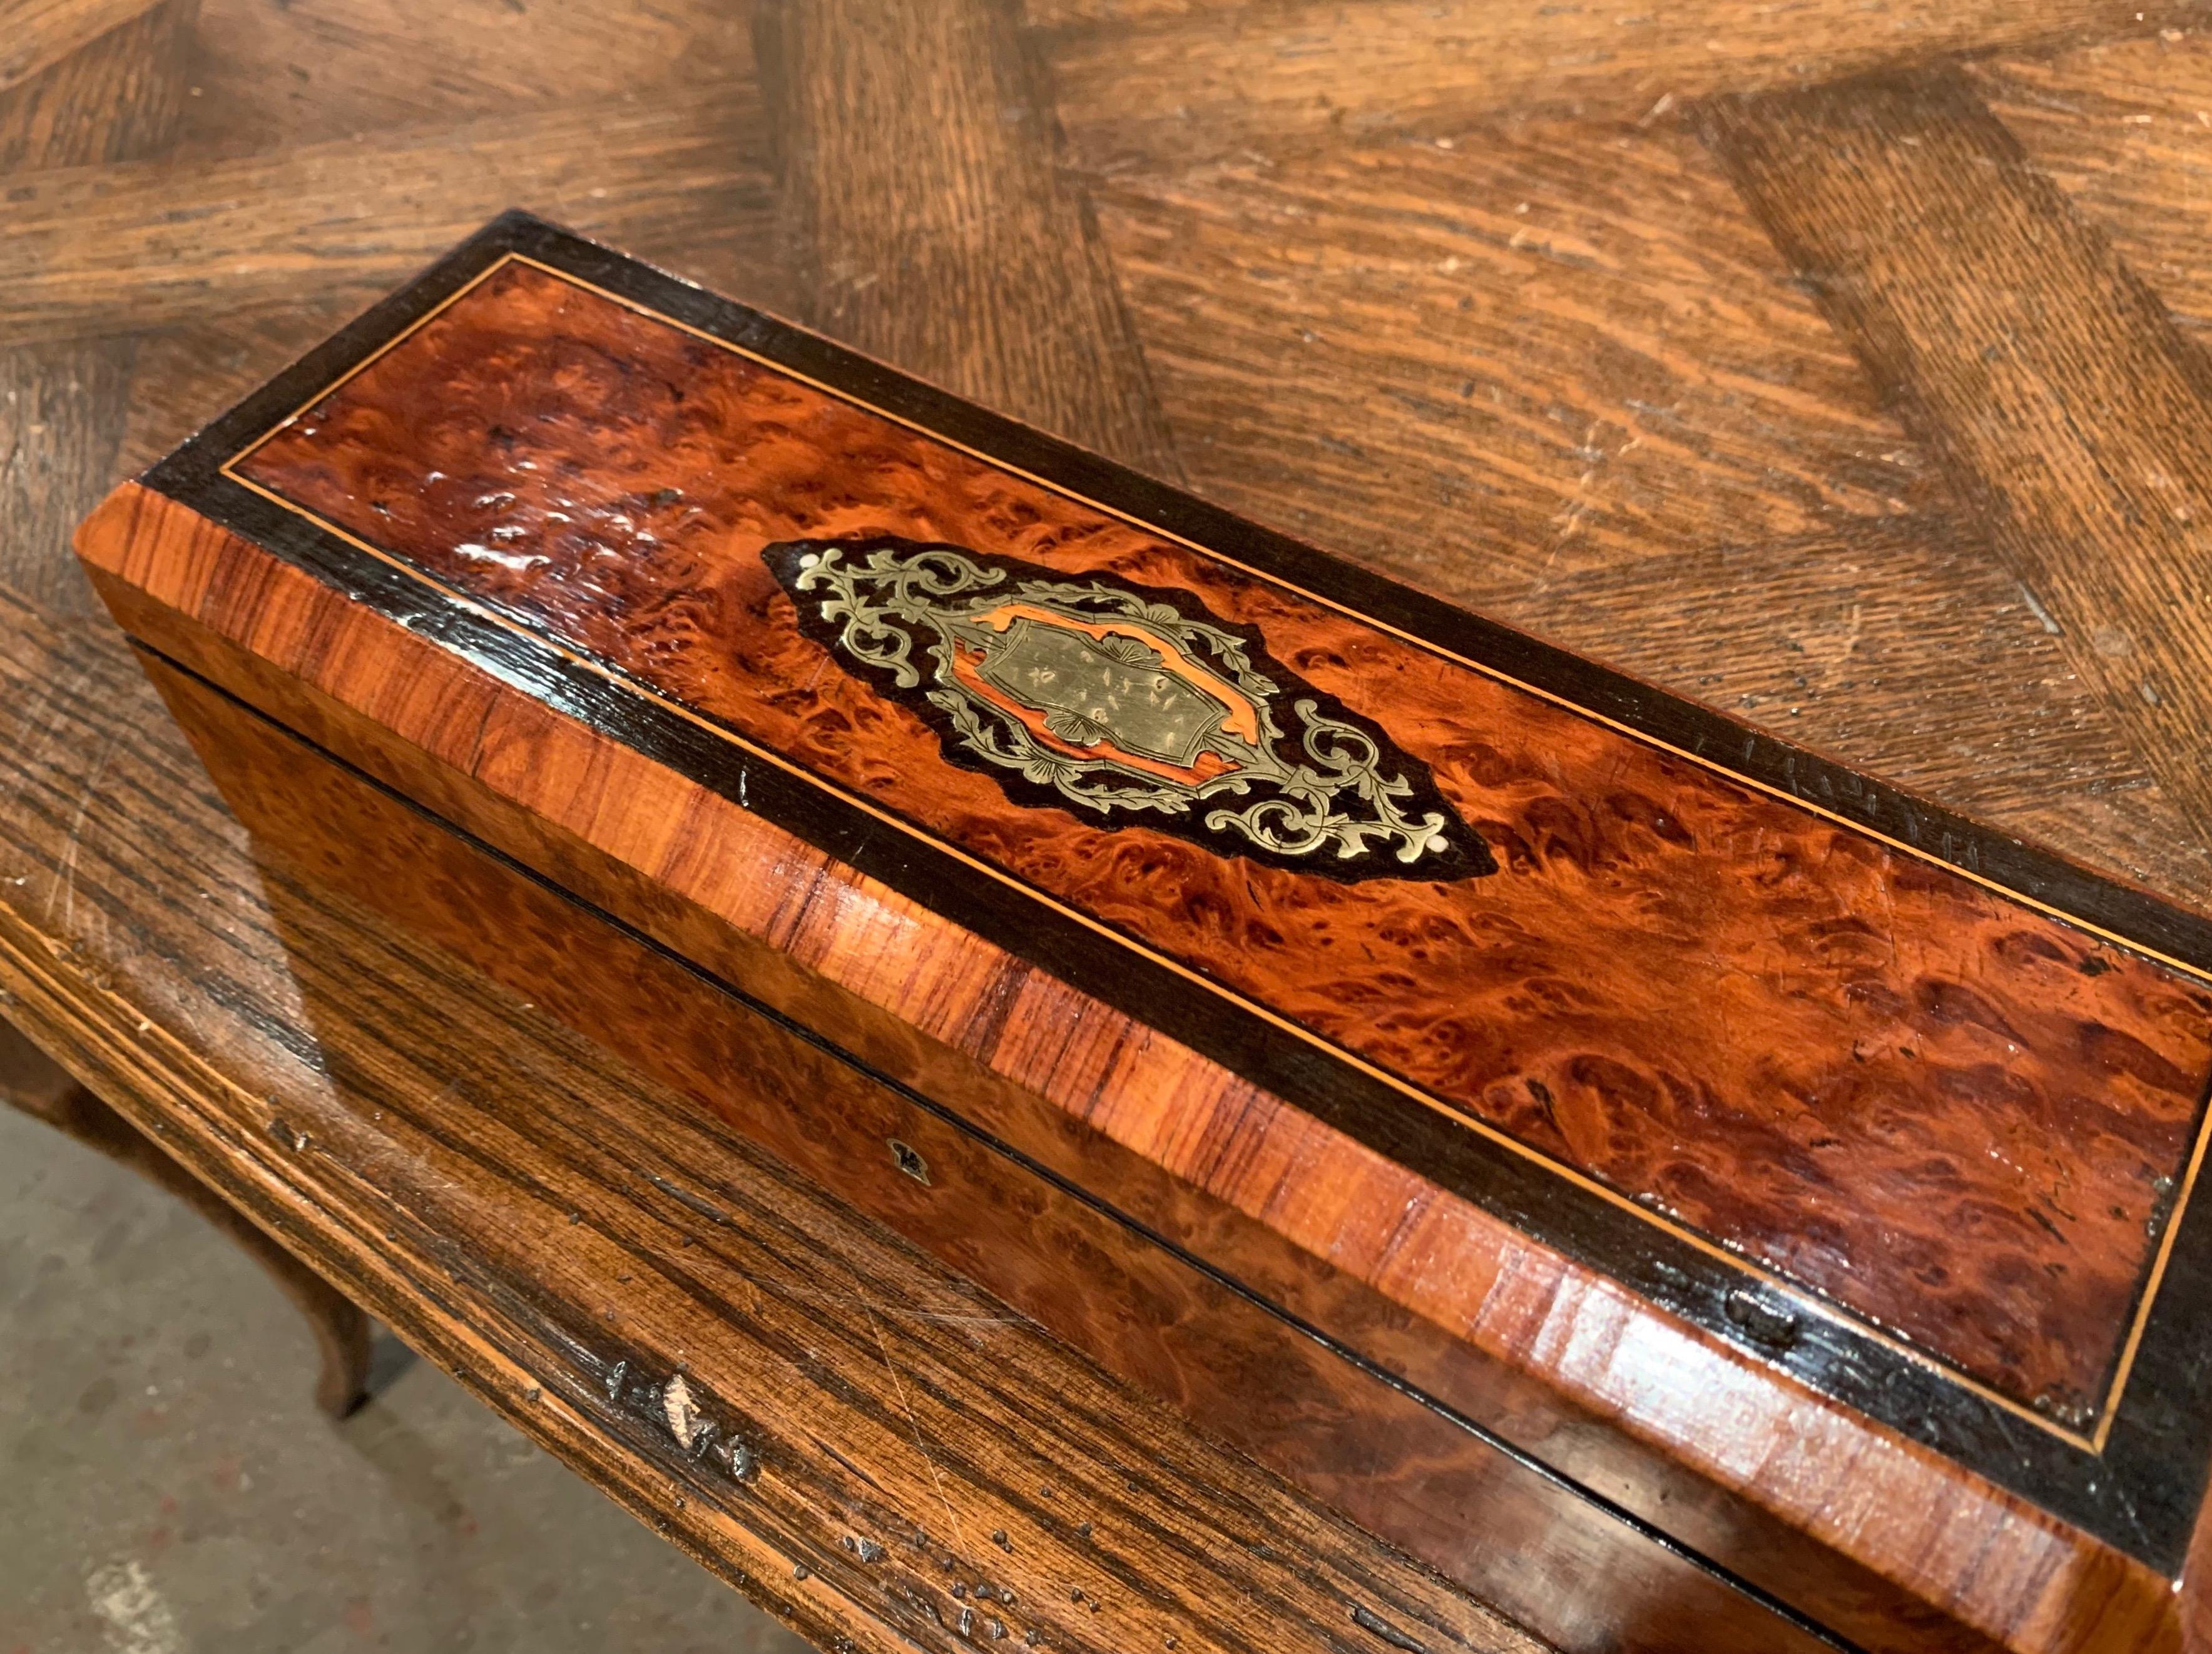 Keep your valuables organized and safe in this elegant antique box; crafted in France circa 1870 and rectangular in shape, the box features a burl walnut veneer and is decorated on the top with a brass inlaid medallion. The inside is upholstered